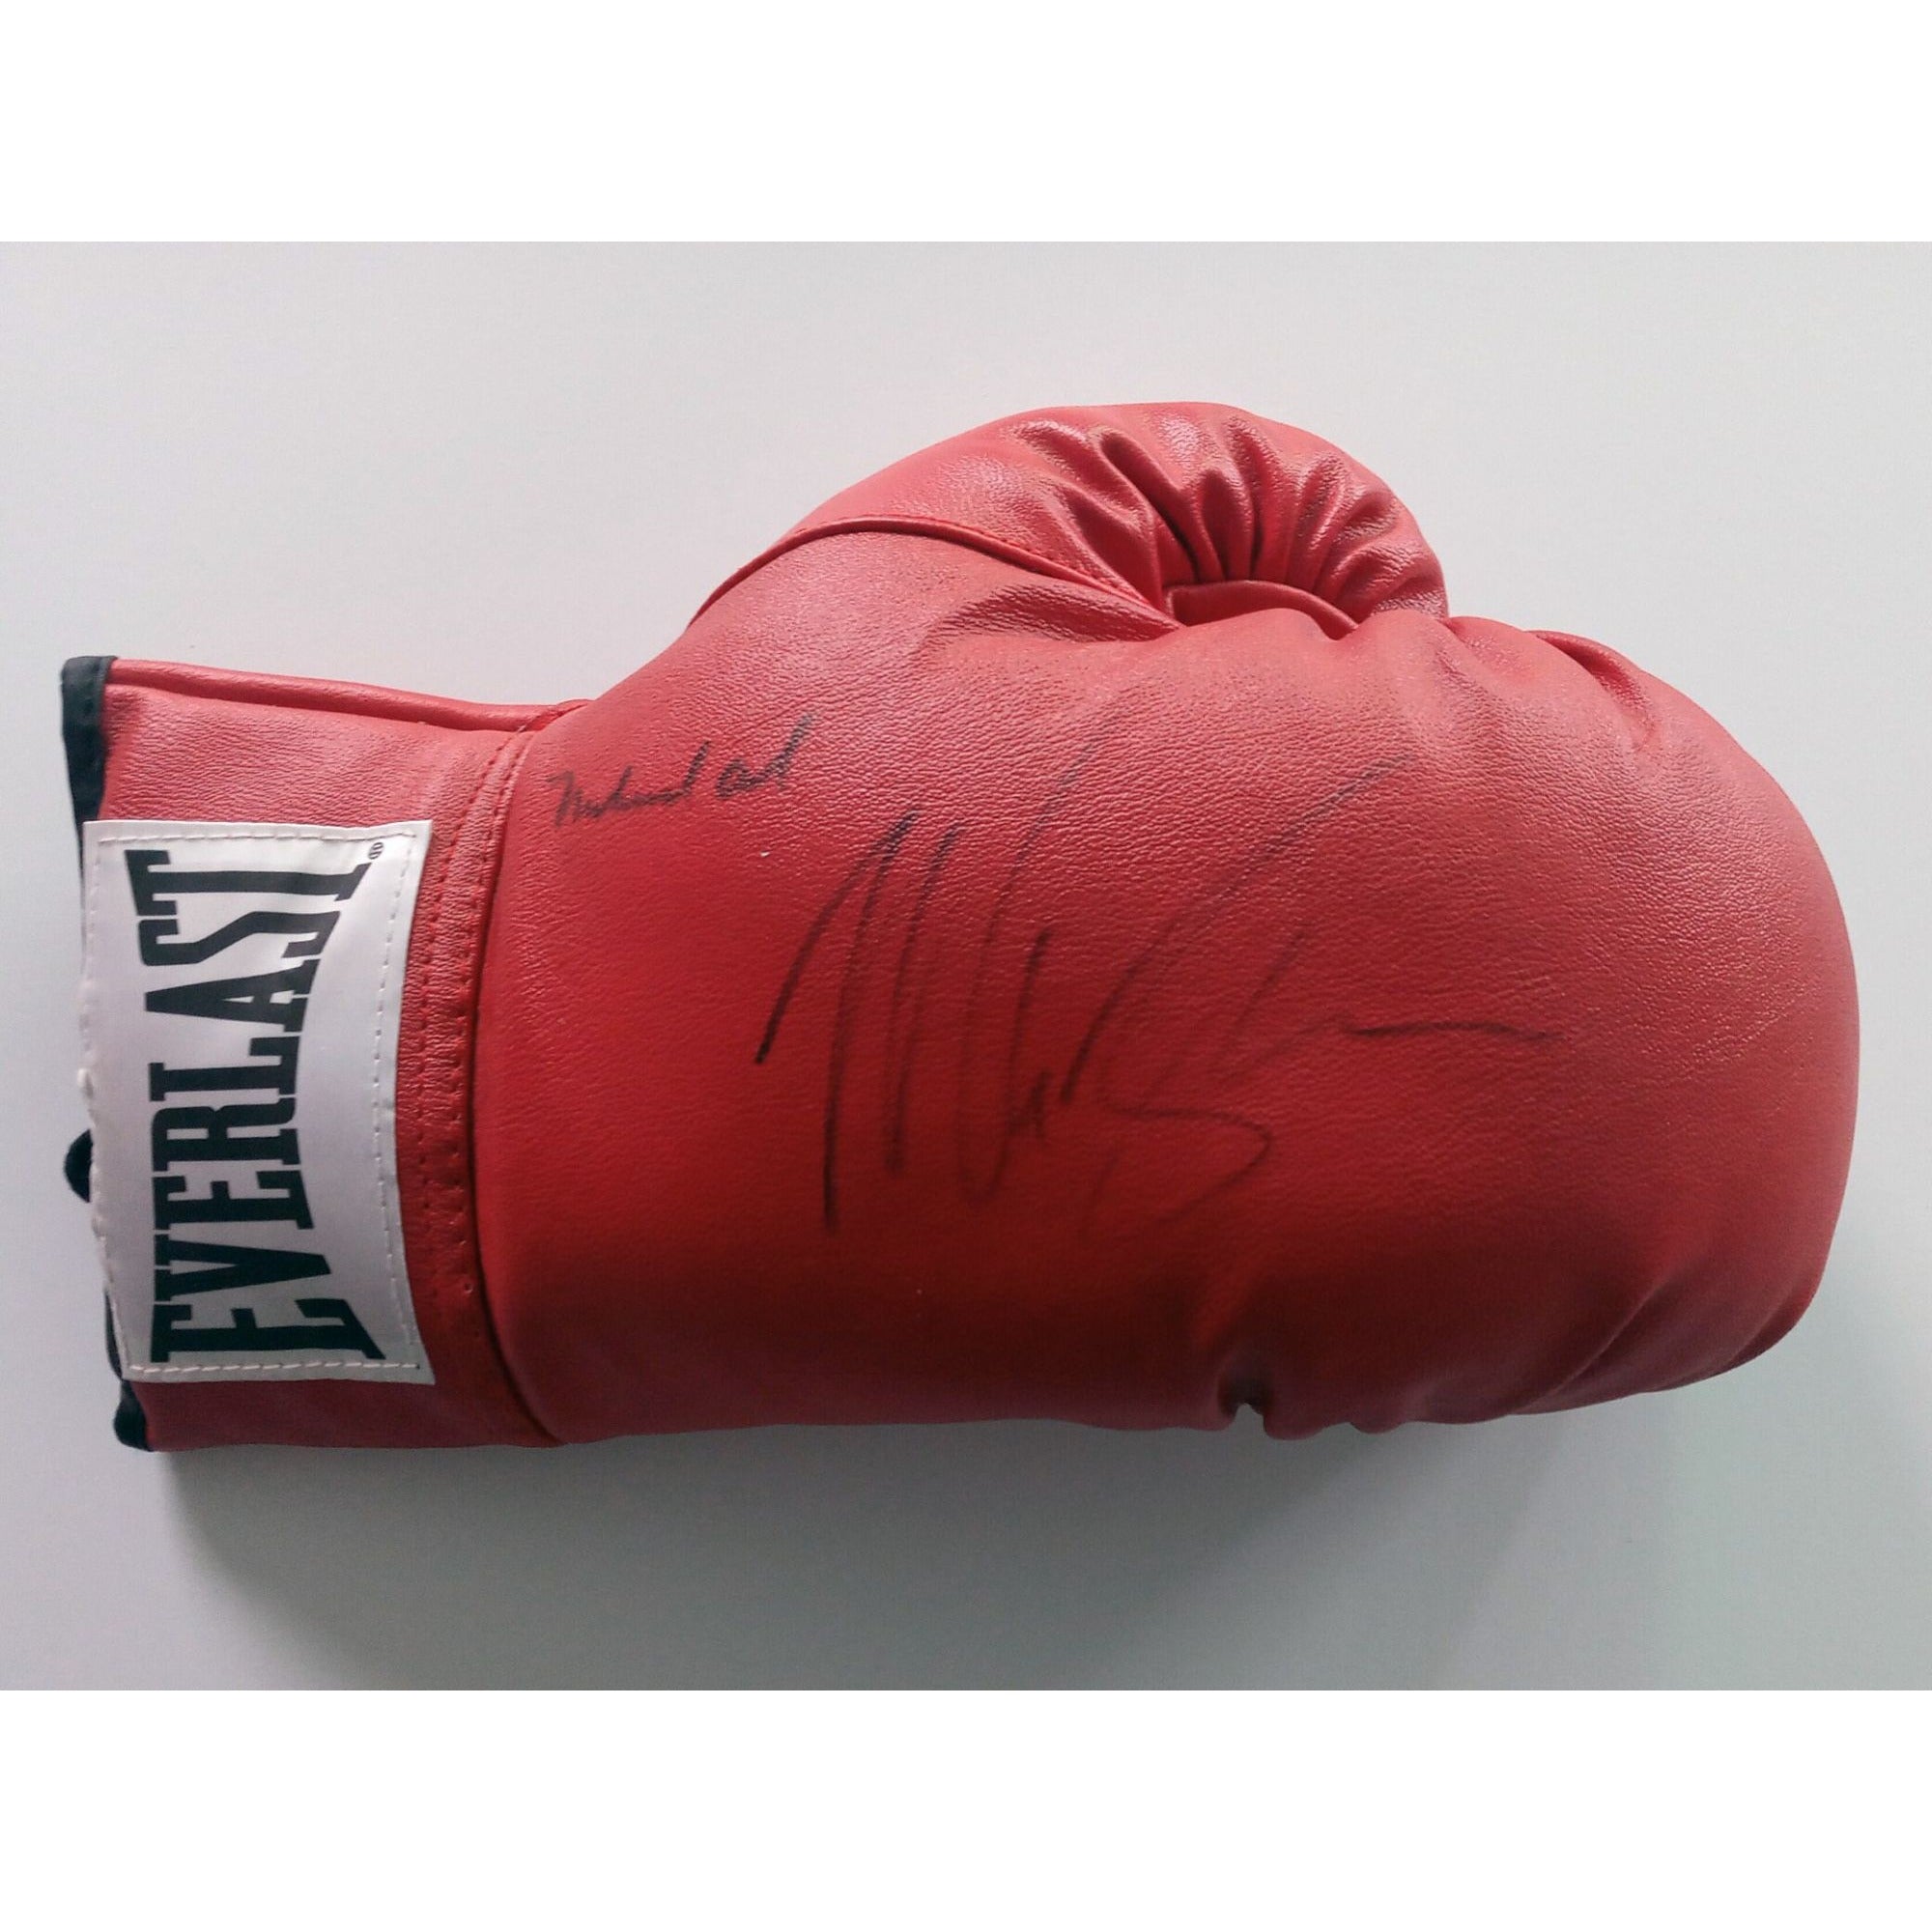 Muhammad Ali and Mike Tyson Everlast leather boxing glove signed with proof